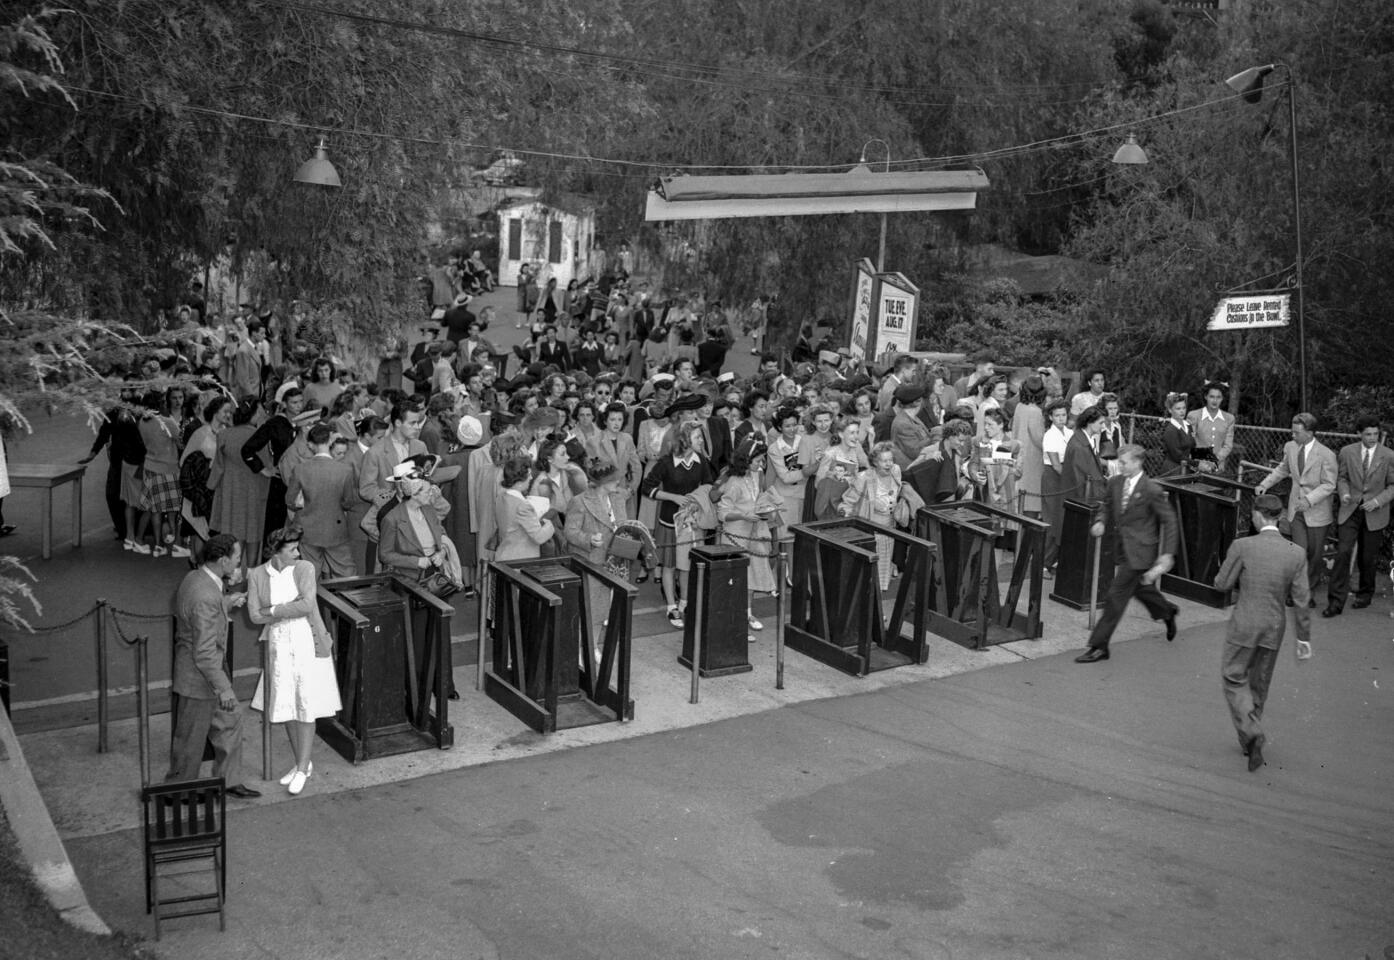 Aug. 14, 1943: Arrival of crowd at Hollywood Bowl for Frank Sinatra performance.